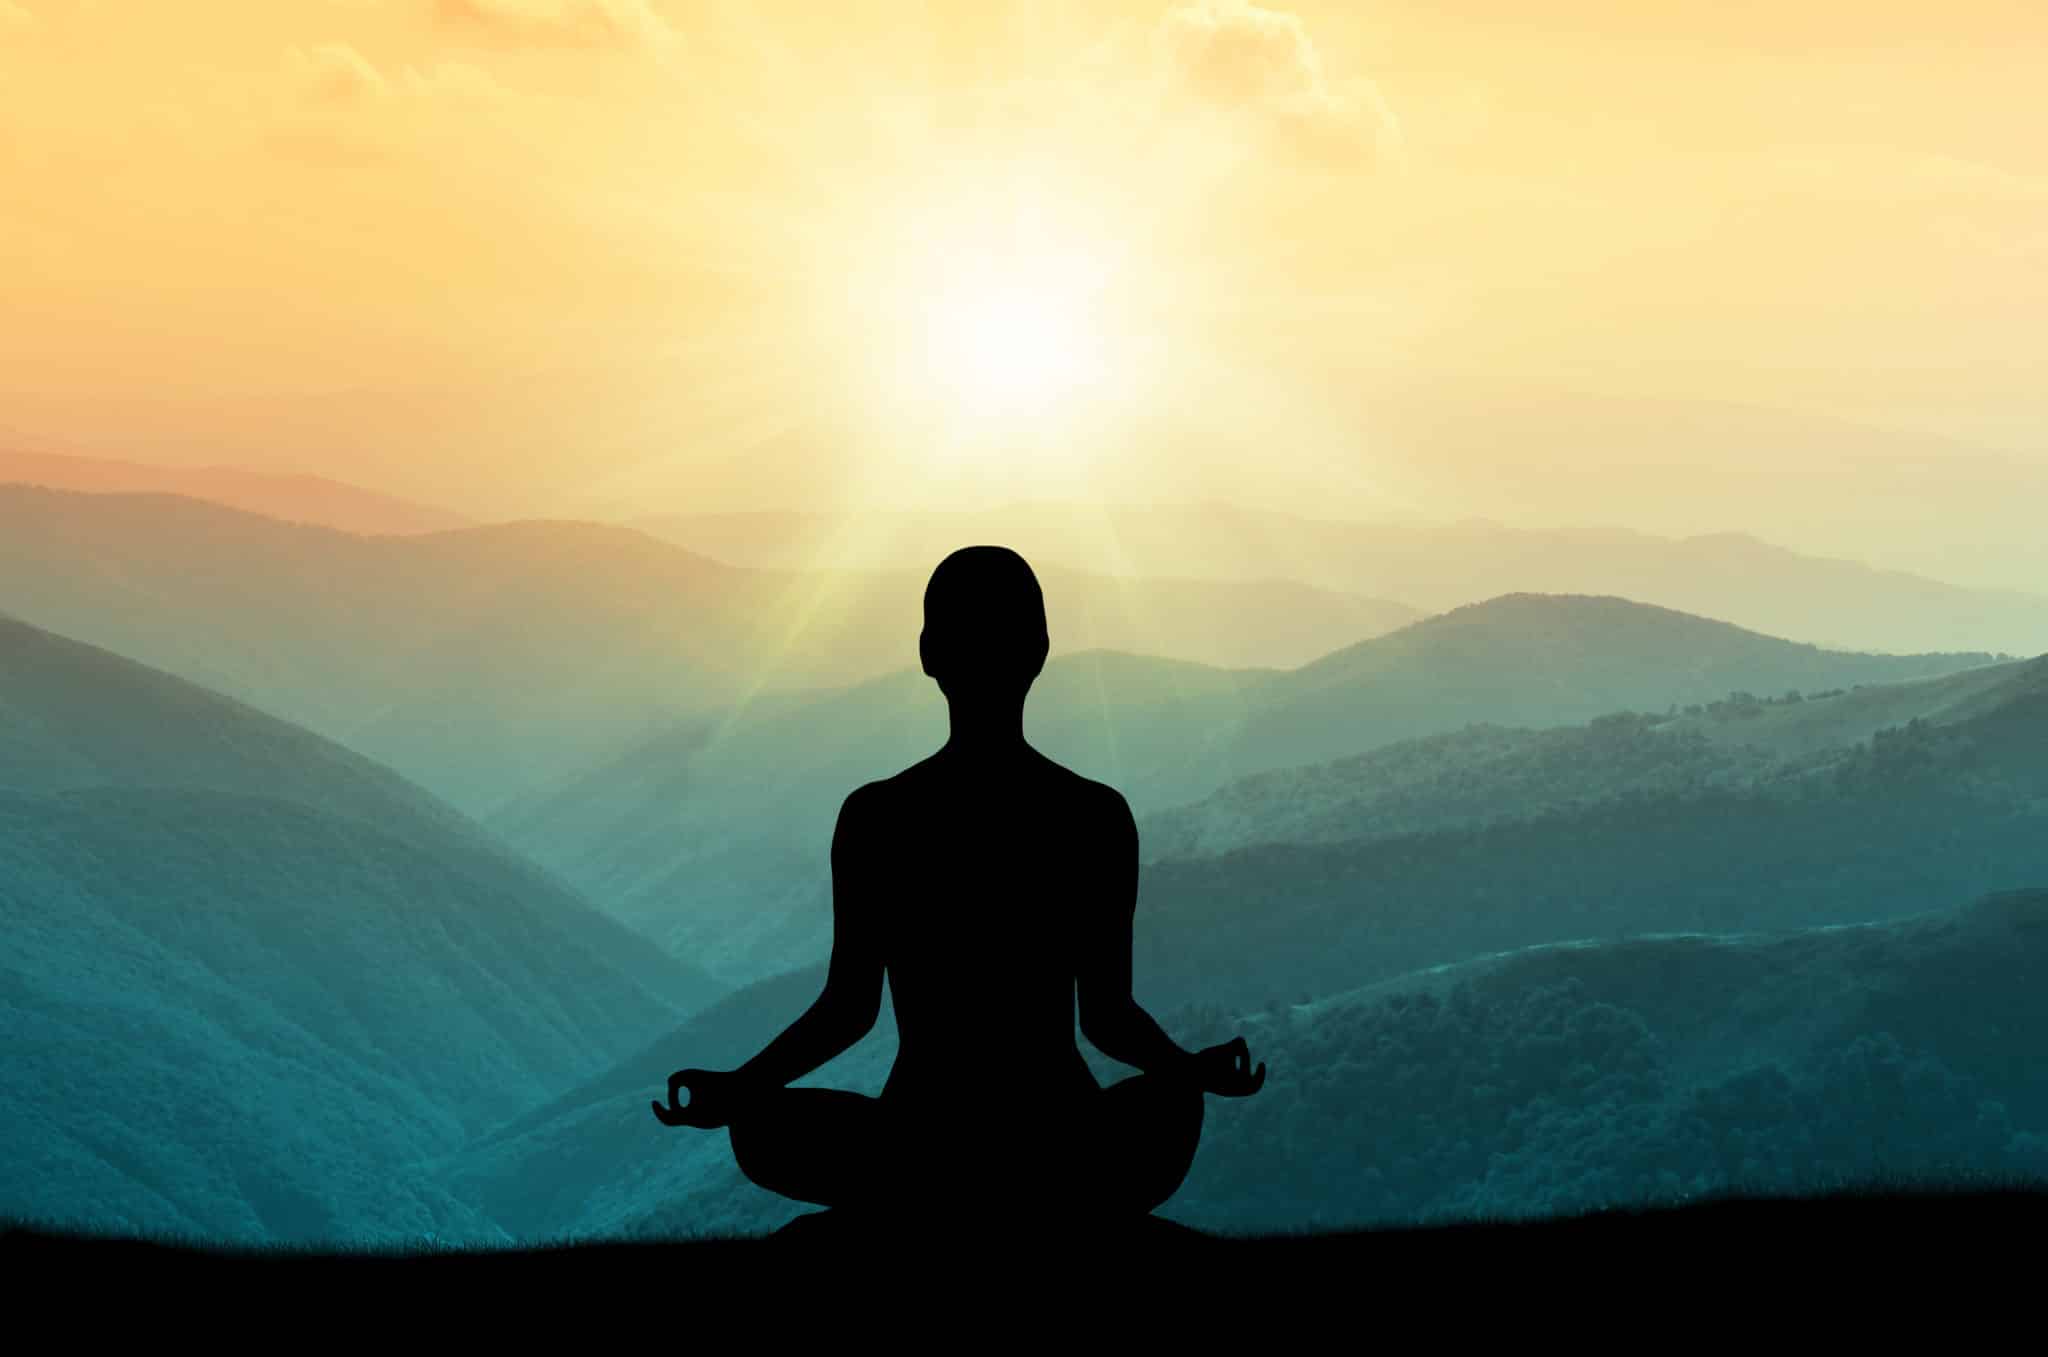 Woman sitting in meditation pose outdoors looking at the mountains and sunset